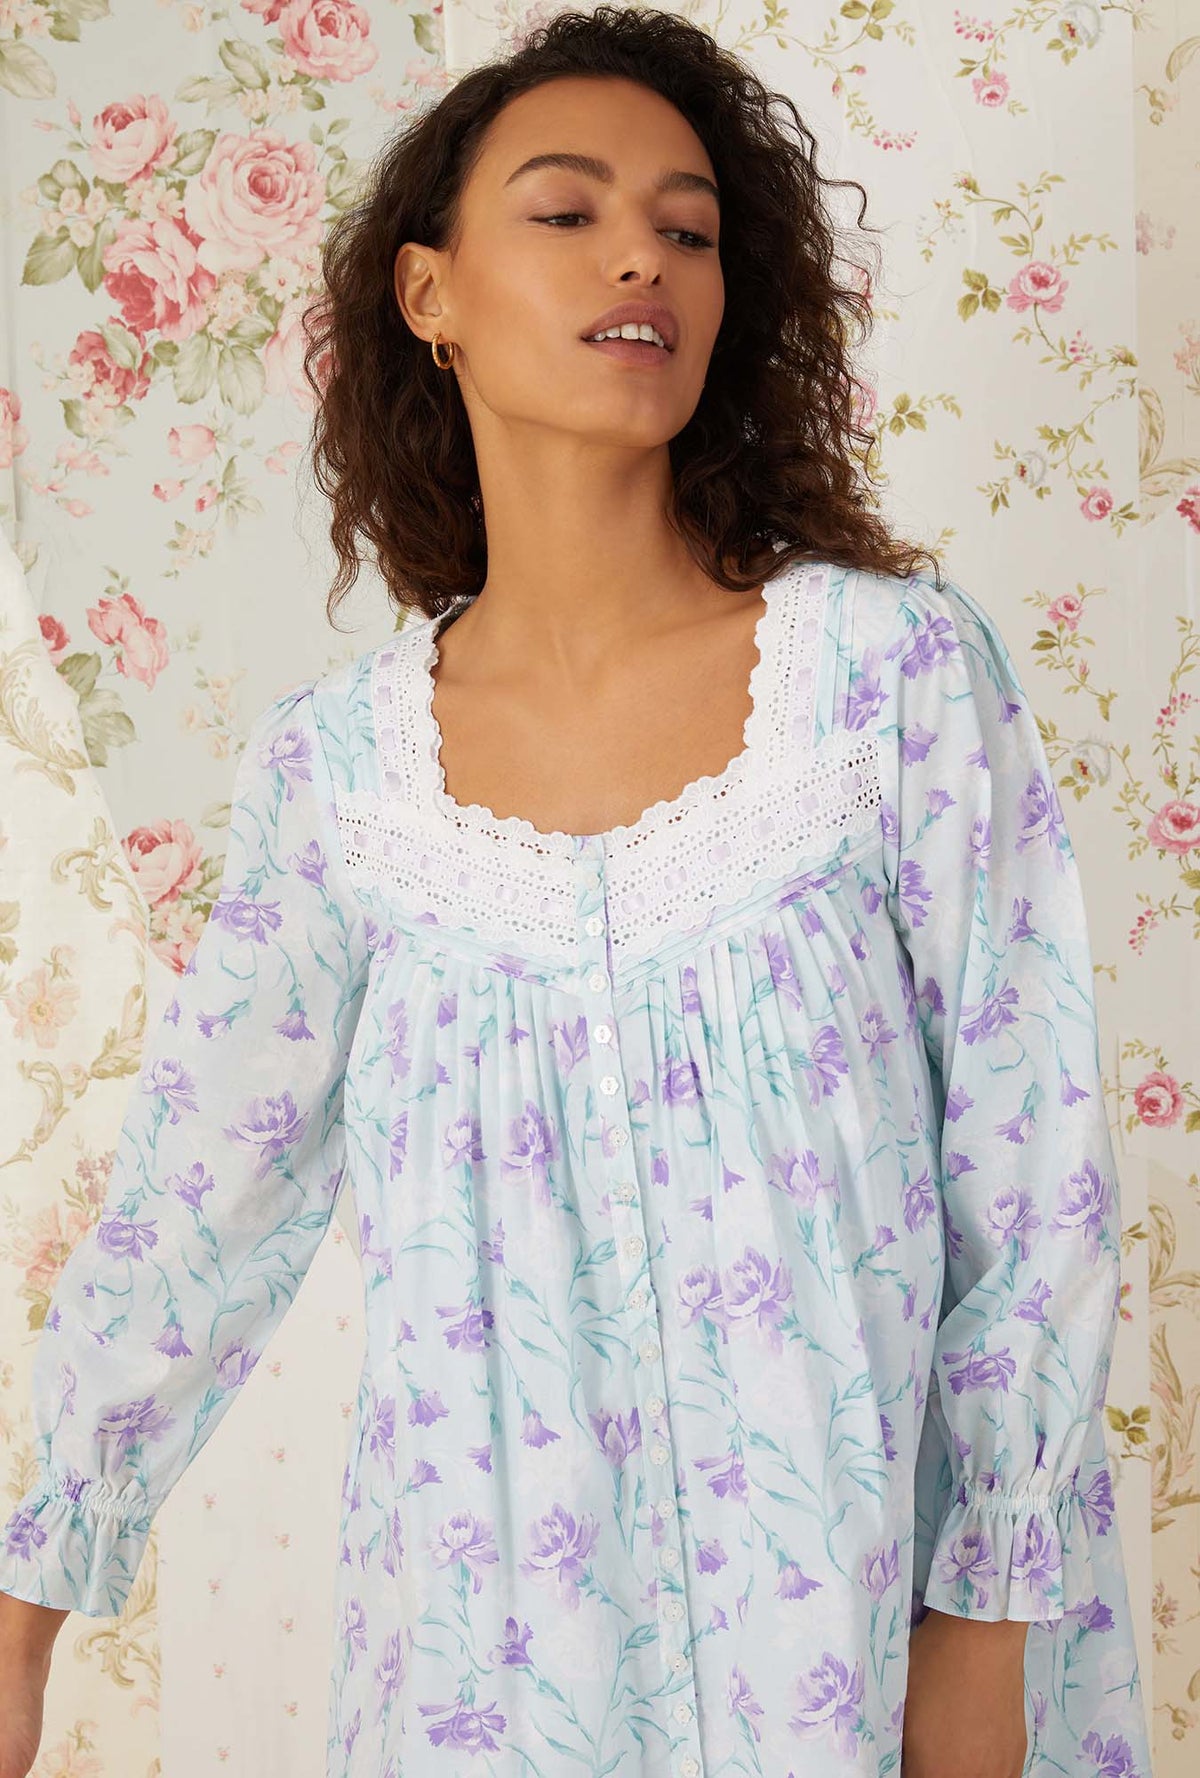 A lady wearing lavender carnations short robe.